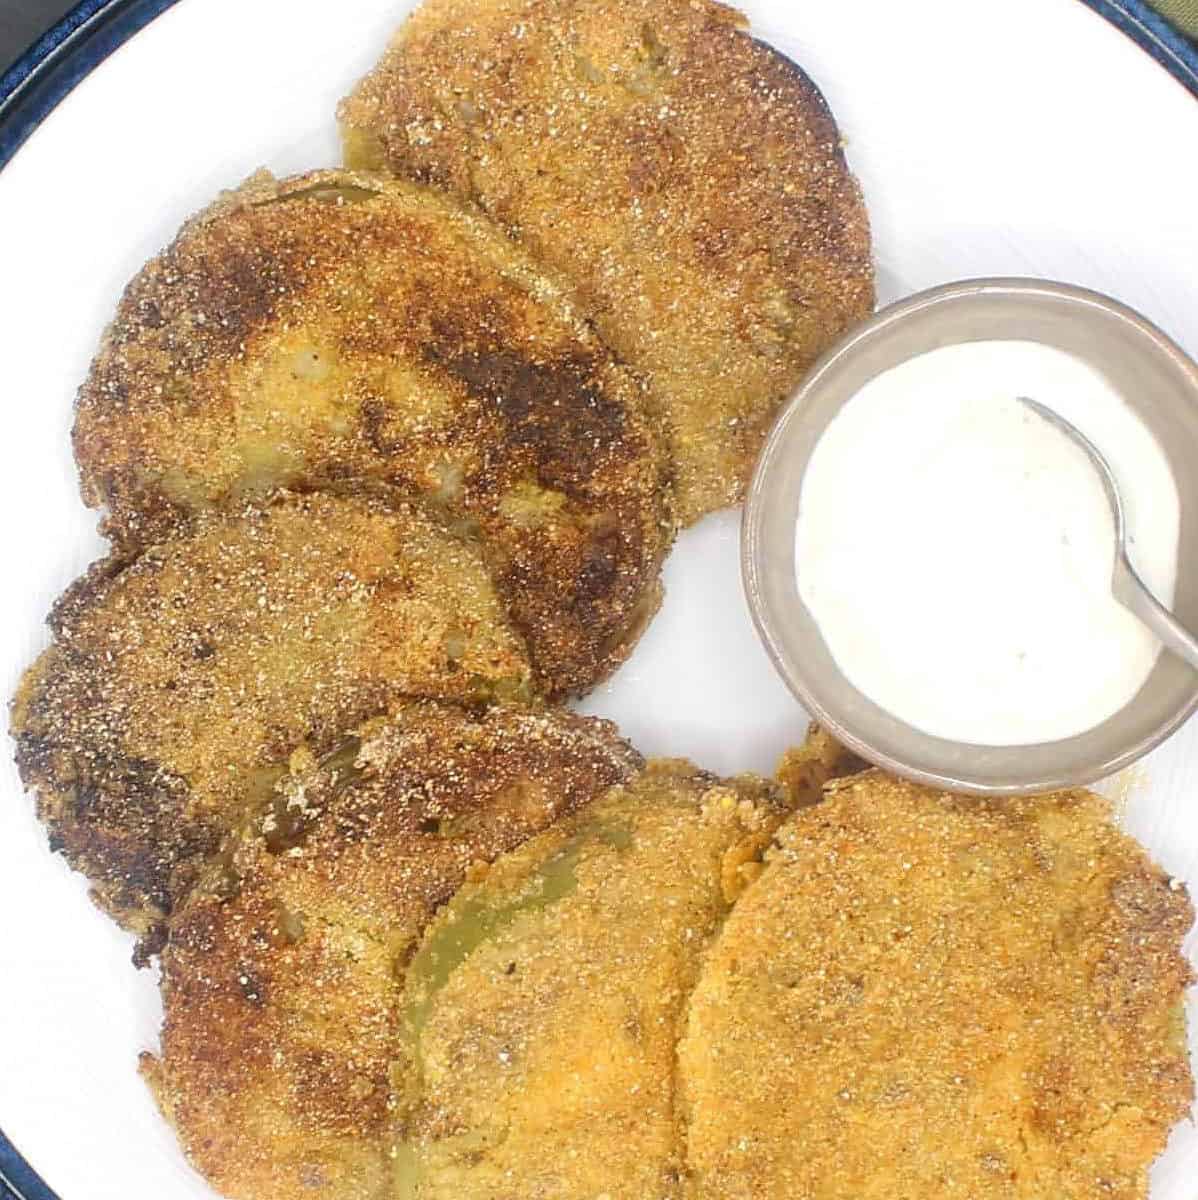  A delightful contrast of tangy green tomato and savory almond flour breading.